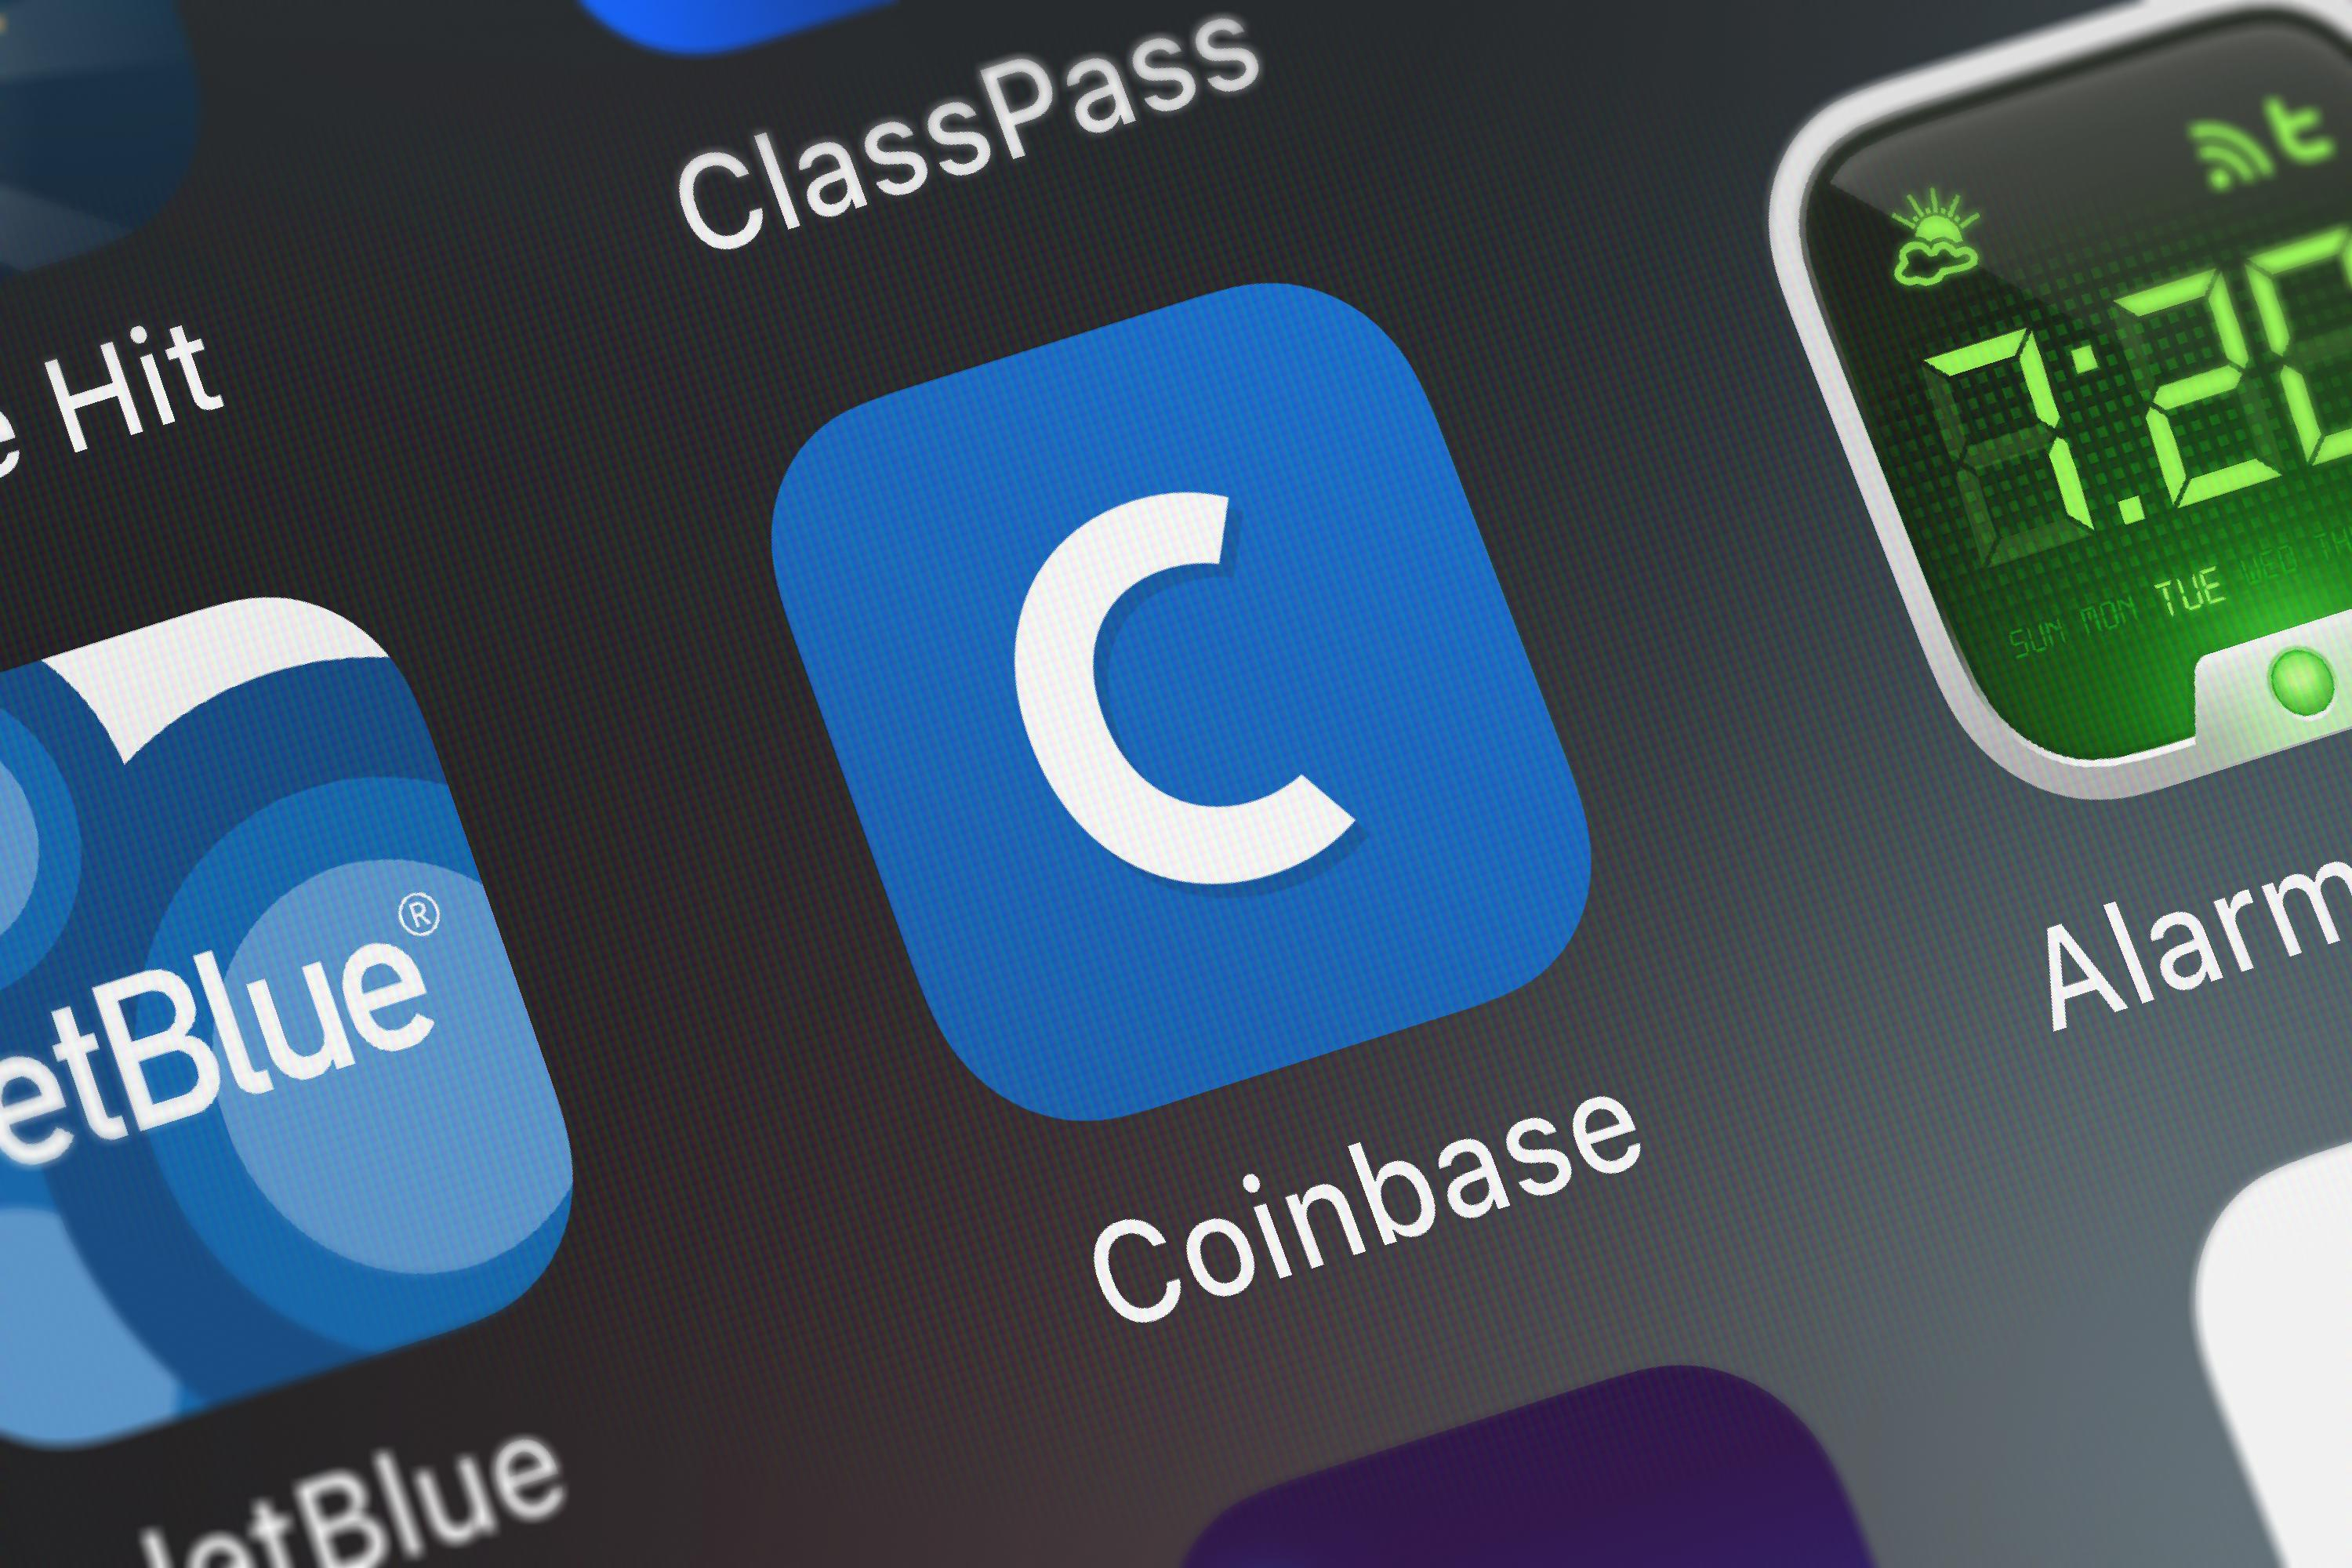 Buy bitcoin with credit card on coinbase app